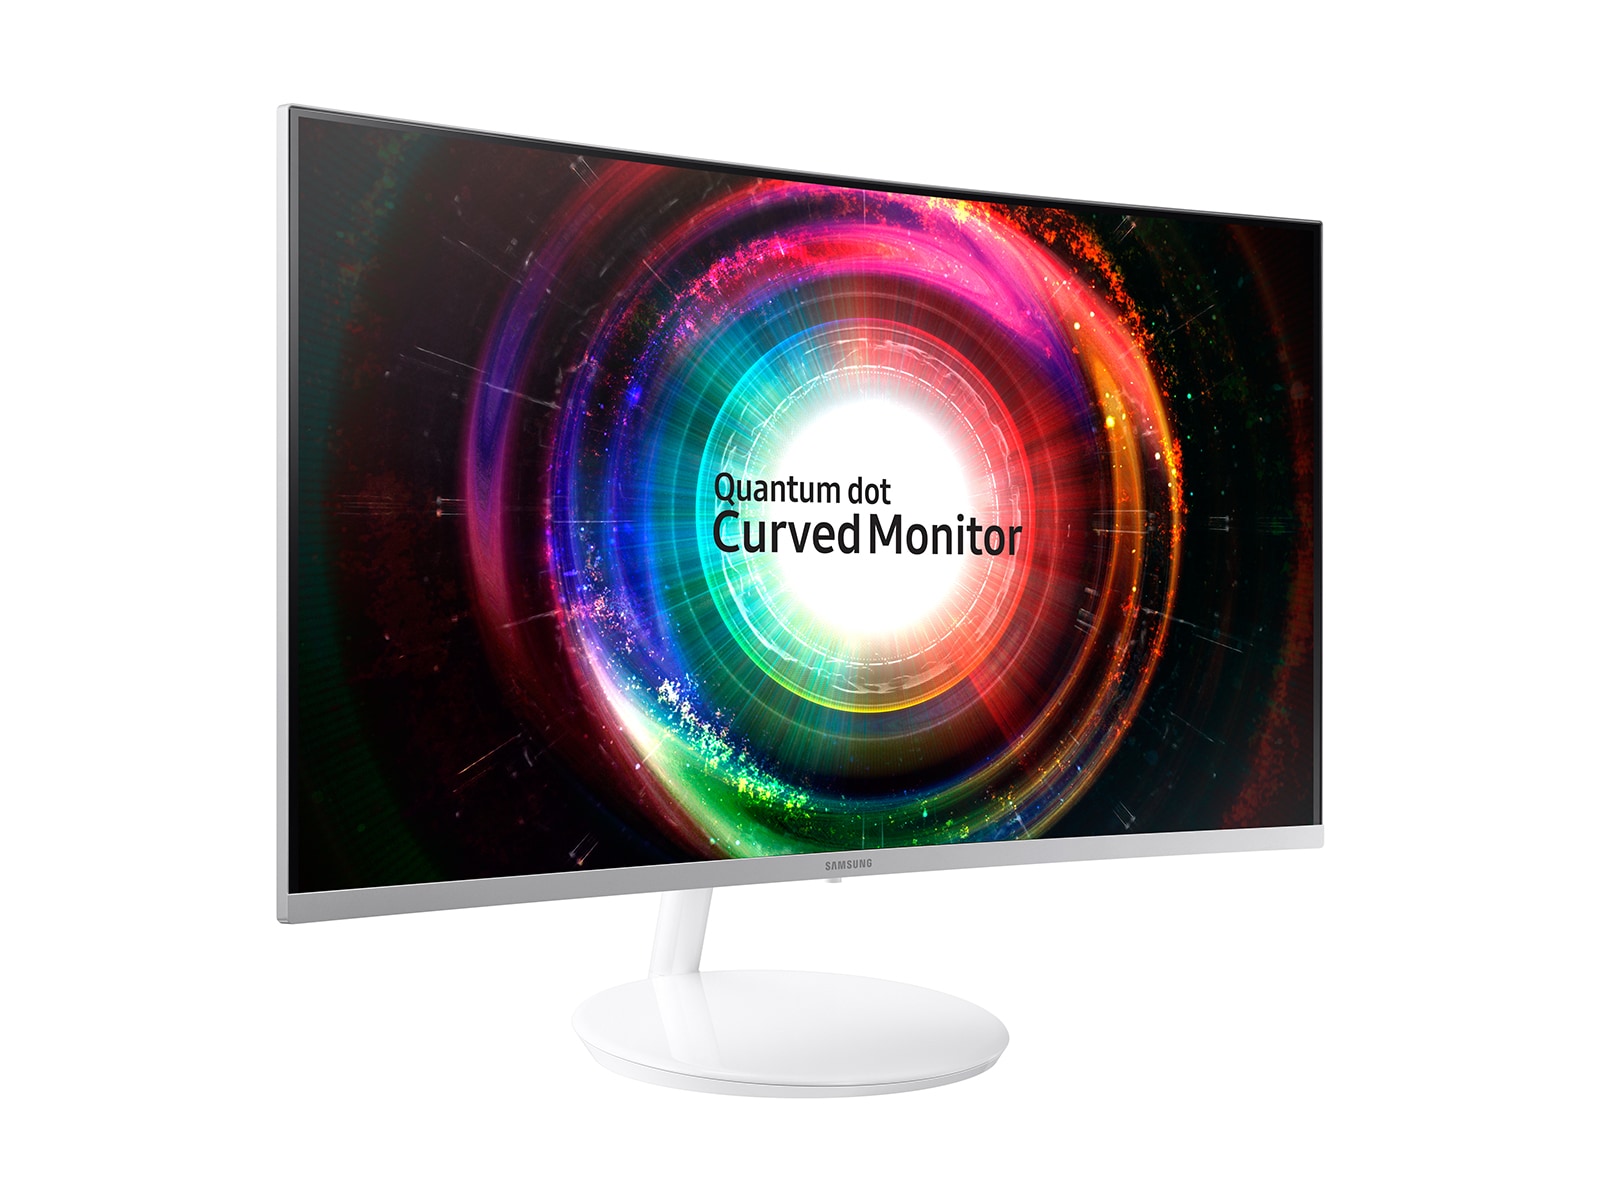 Samsung 32" CH711 Curved Monitor - image 1 of 14